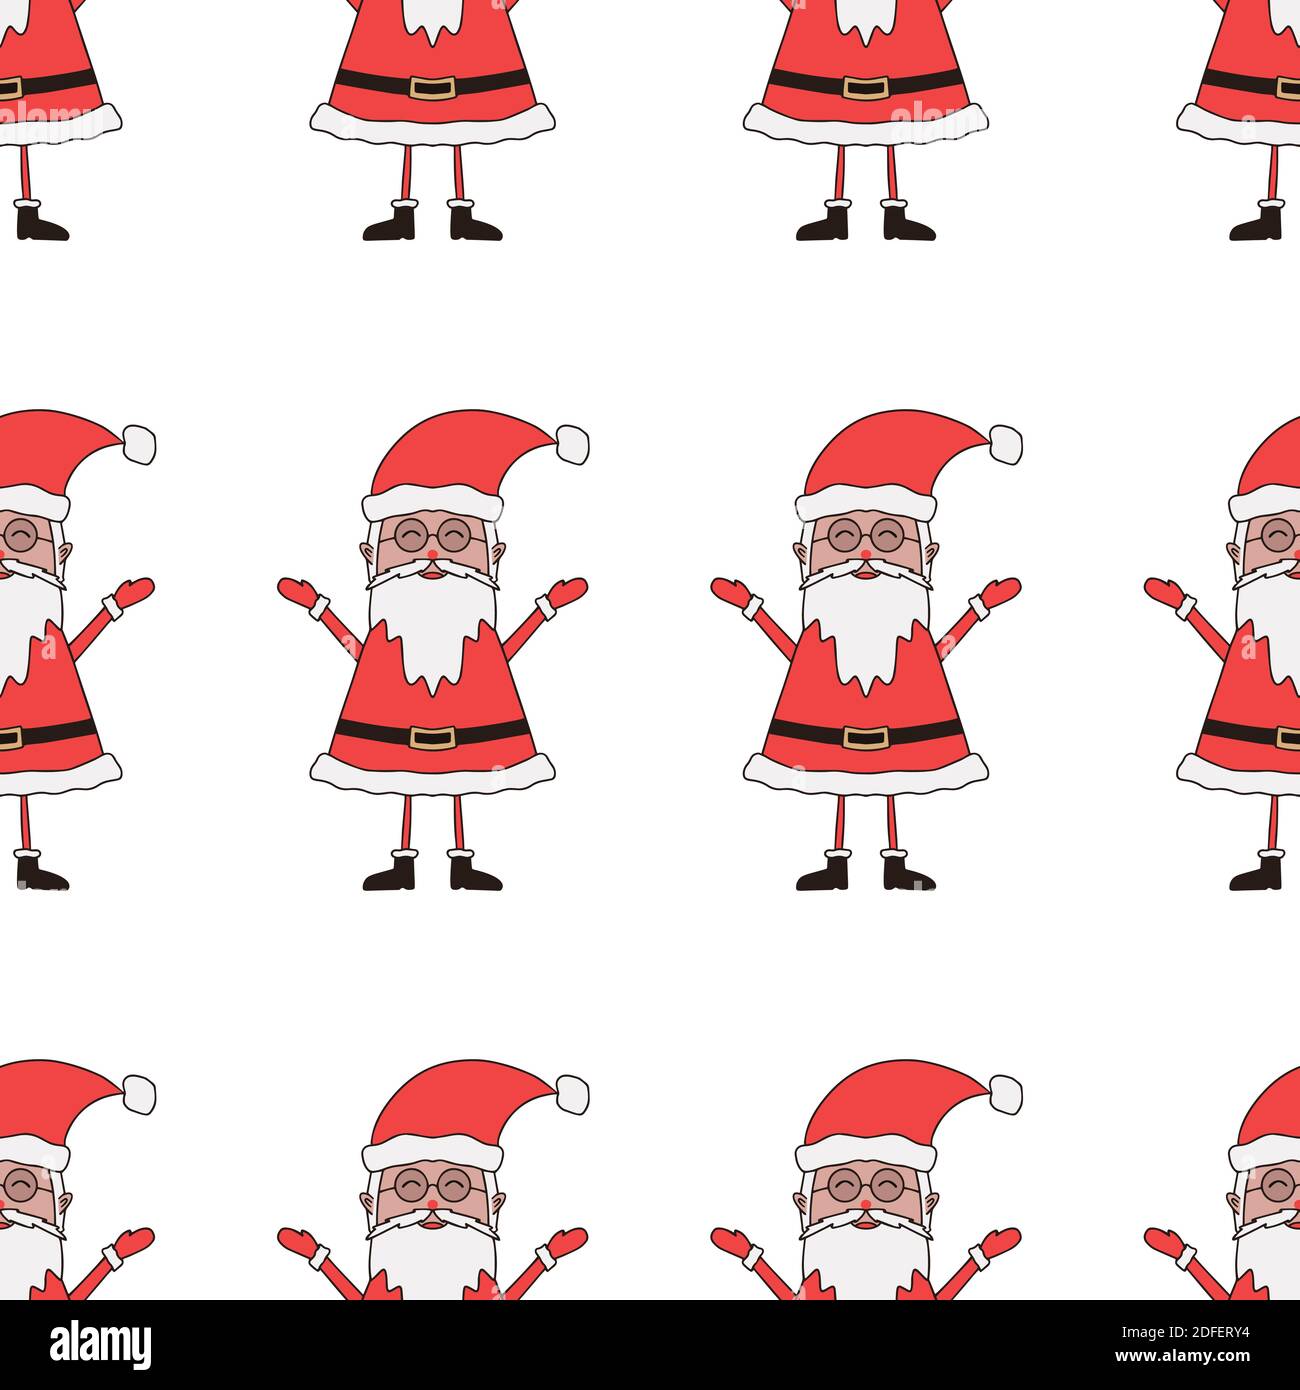 Christmas seamless pattern made from Santa Claus character on a white background. Stock Vector